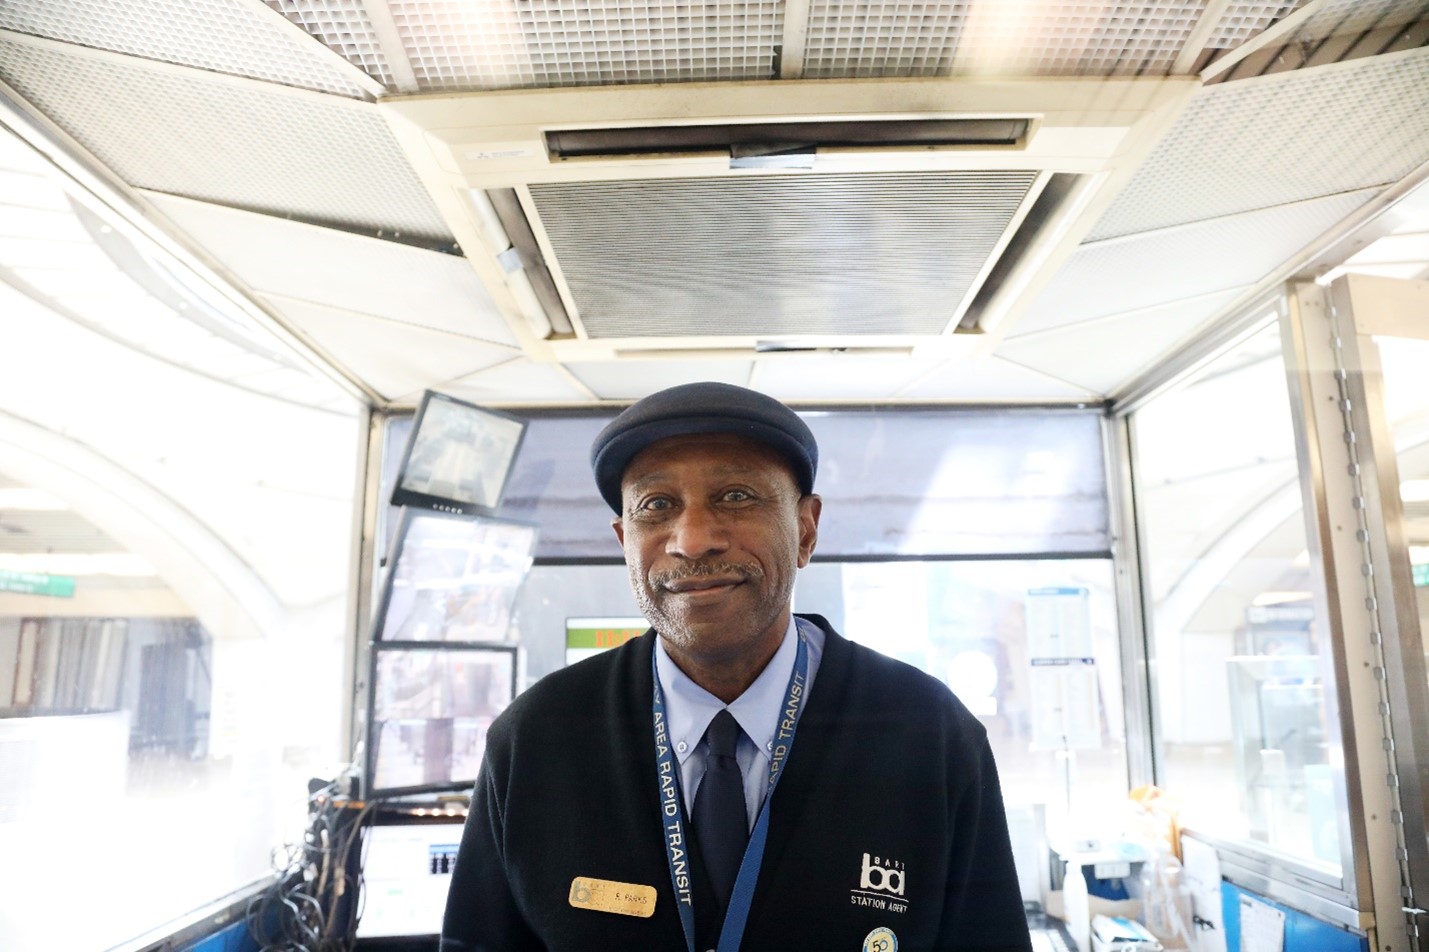  10 Questions with BART Station Agent Robert Parks